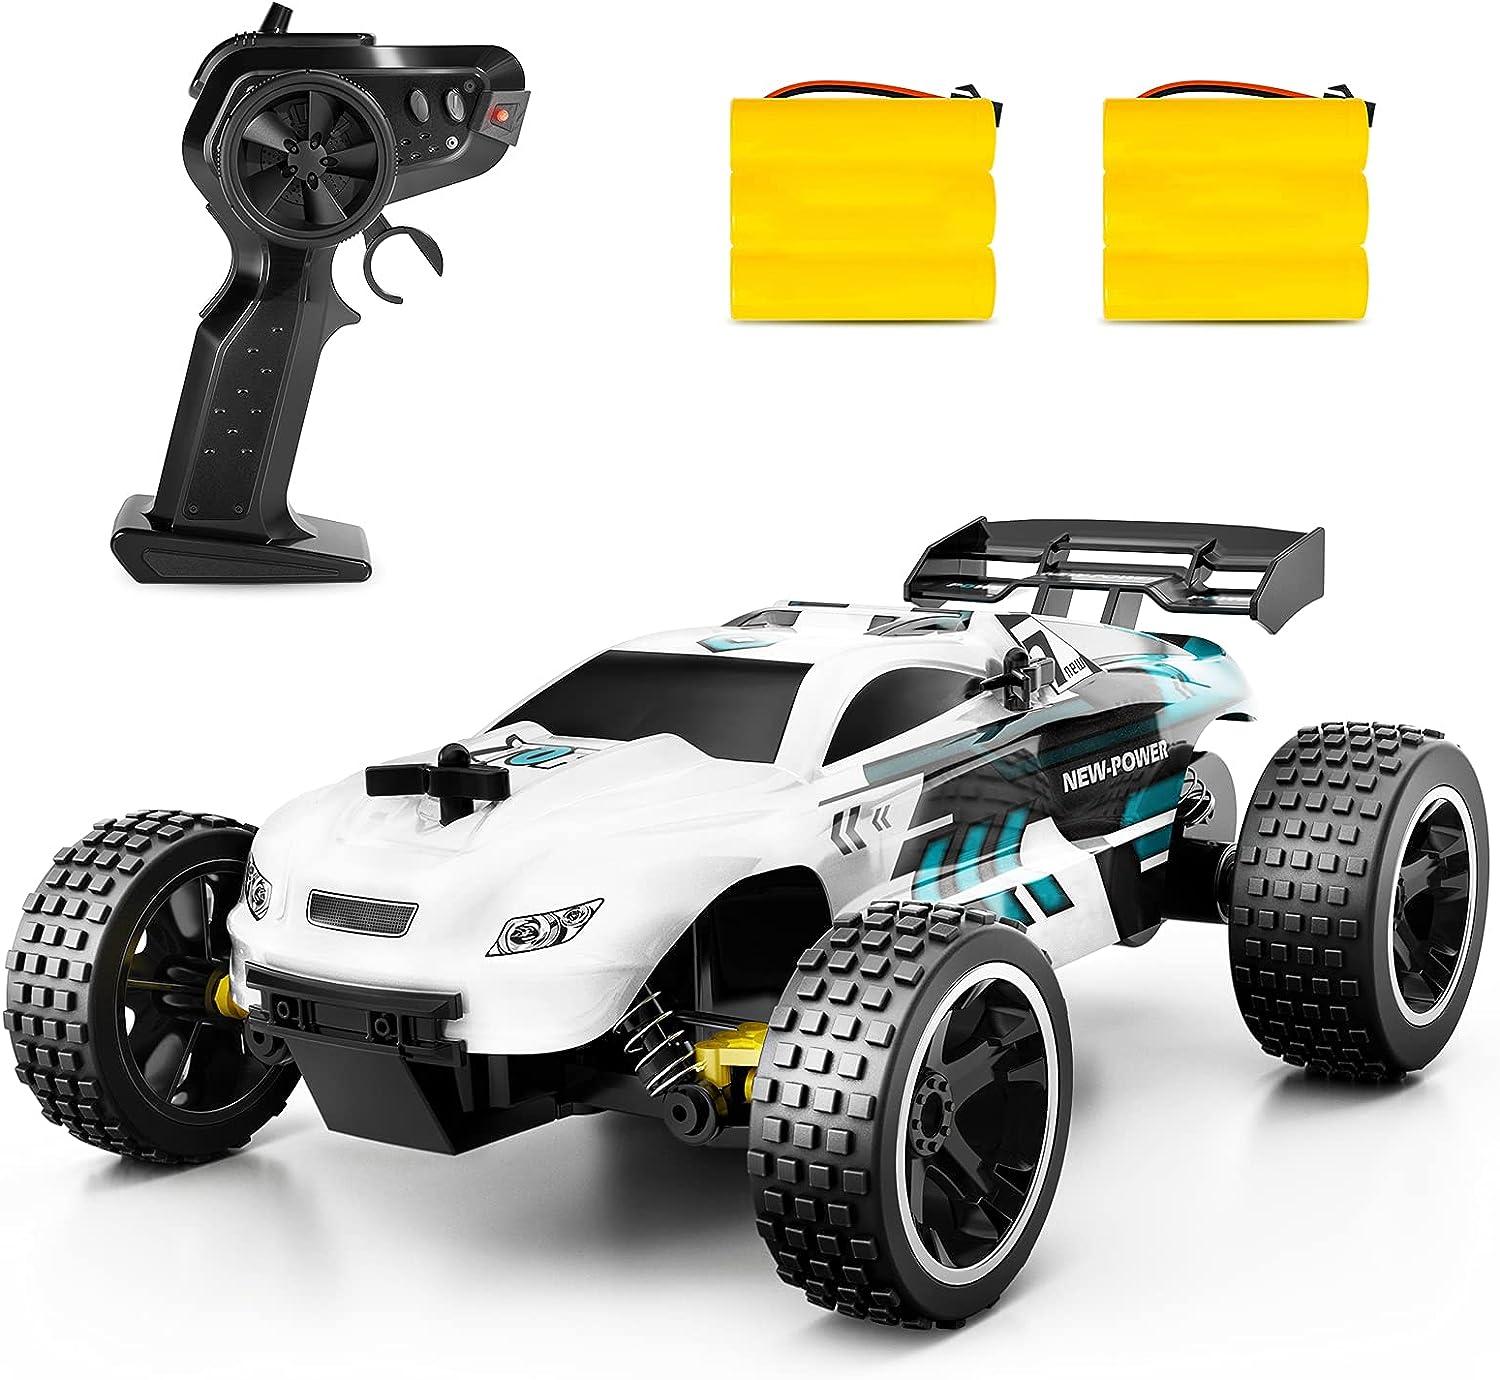 2.4 Ghz Rc Car: Benefits and Features of 2.4 GHz RC Cars